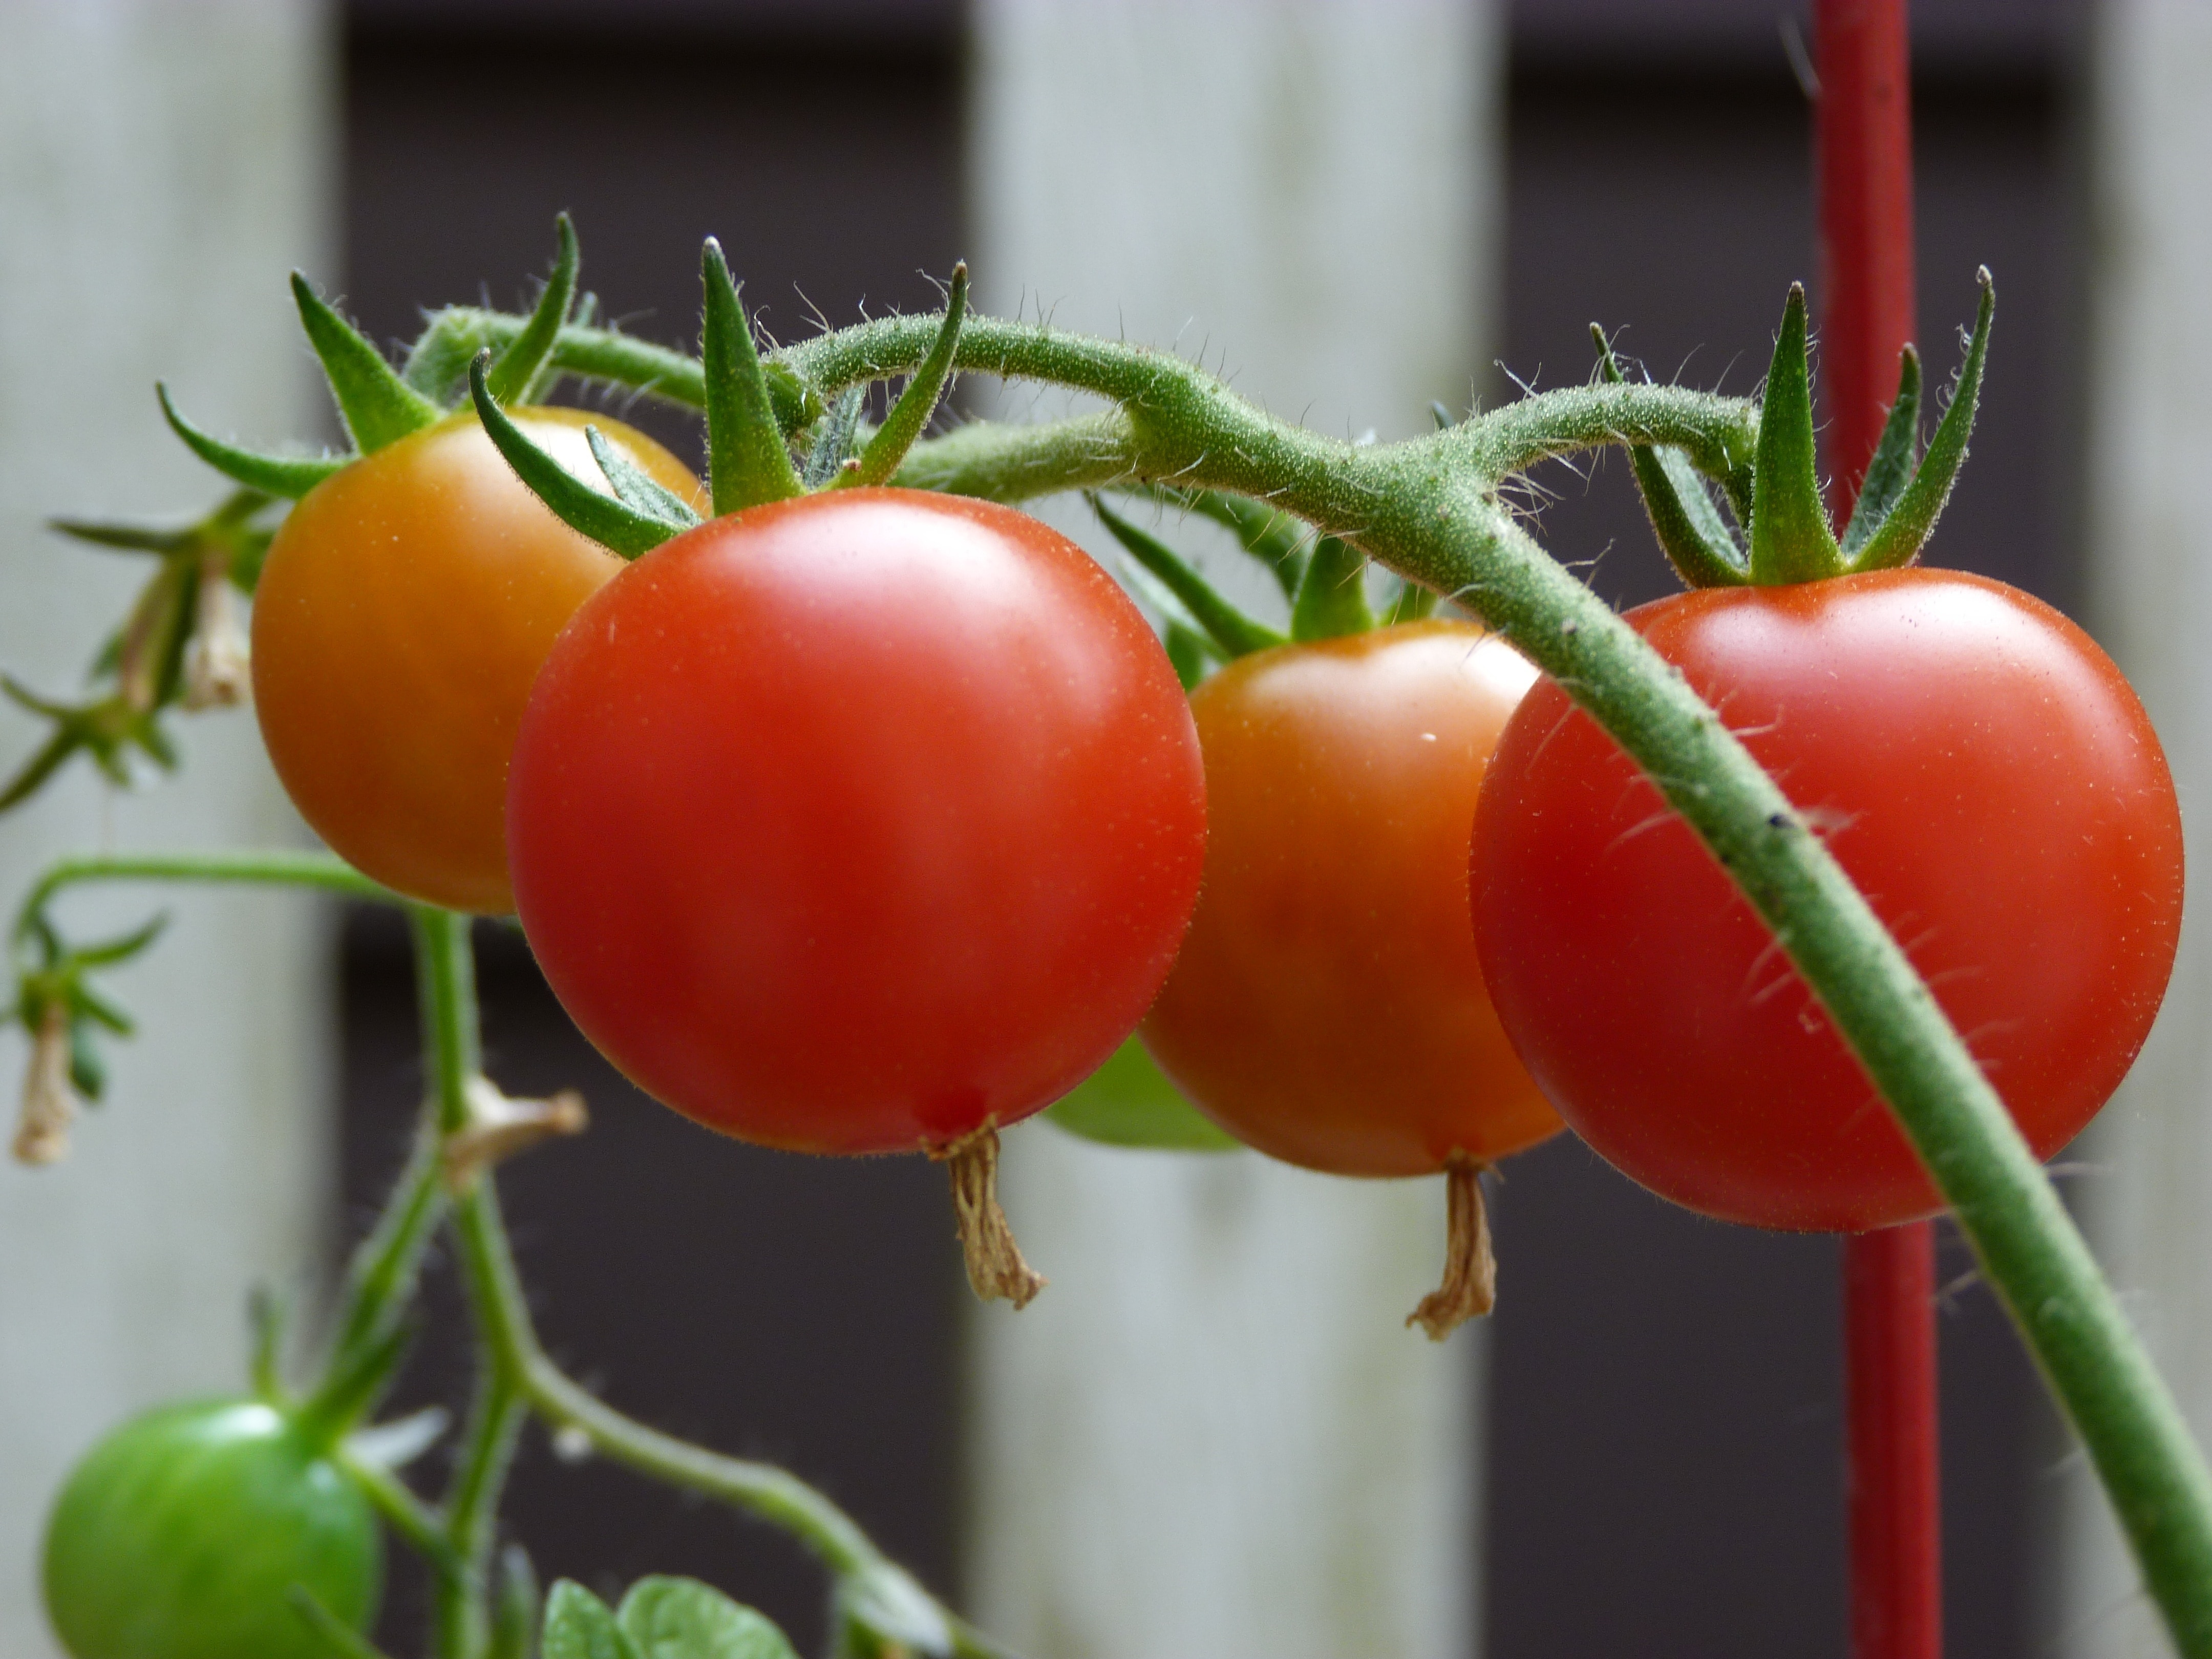 Tomatoes, Garden, Ripe, Organic, Healthy, food and drink, vegetable